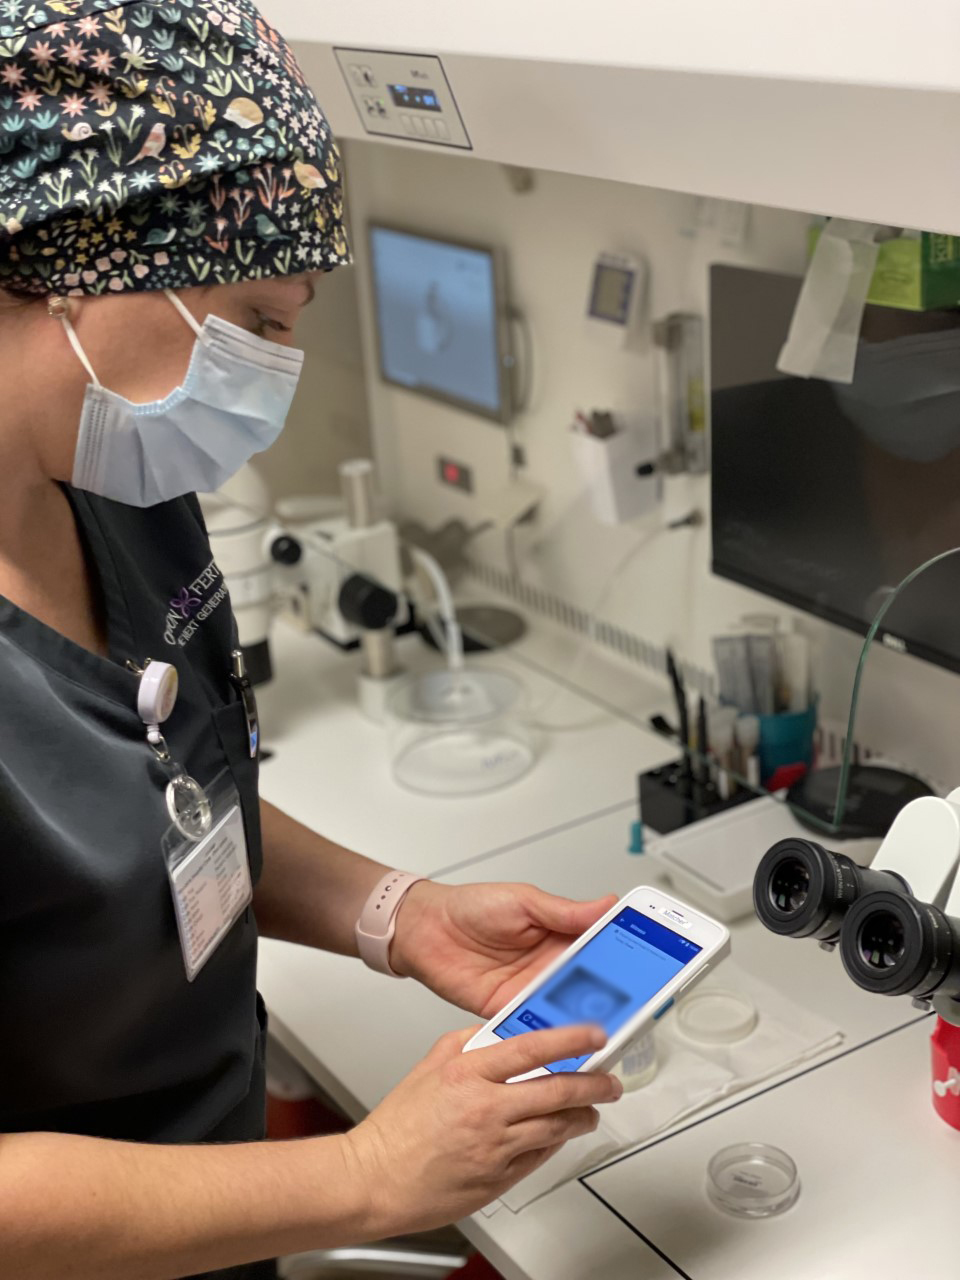 Tricia Adams, senior embryologist, completes a chain-of-custody process by scanning a patient-specific barcode on a dish using the Matcher electronic witnessing system at Ovation Fertility Baton Rouge.